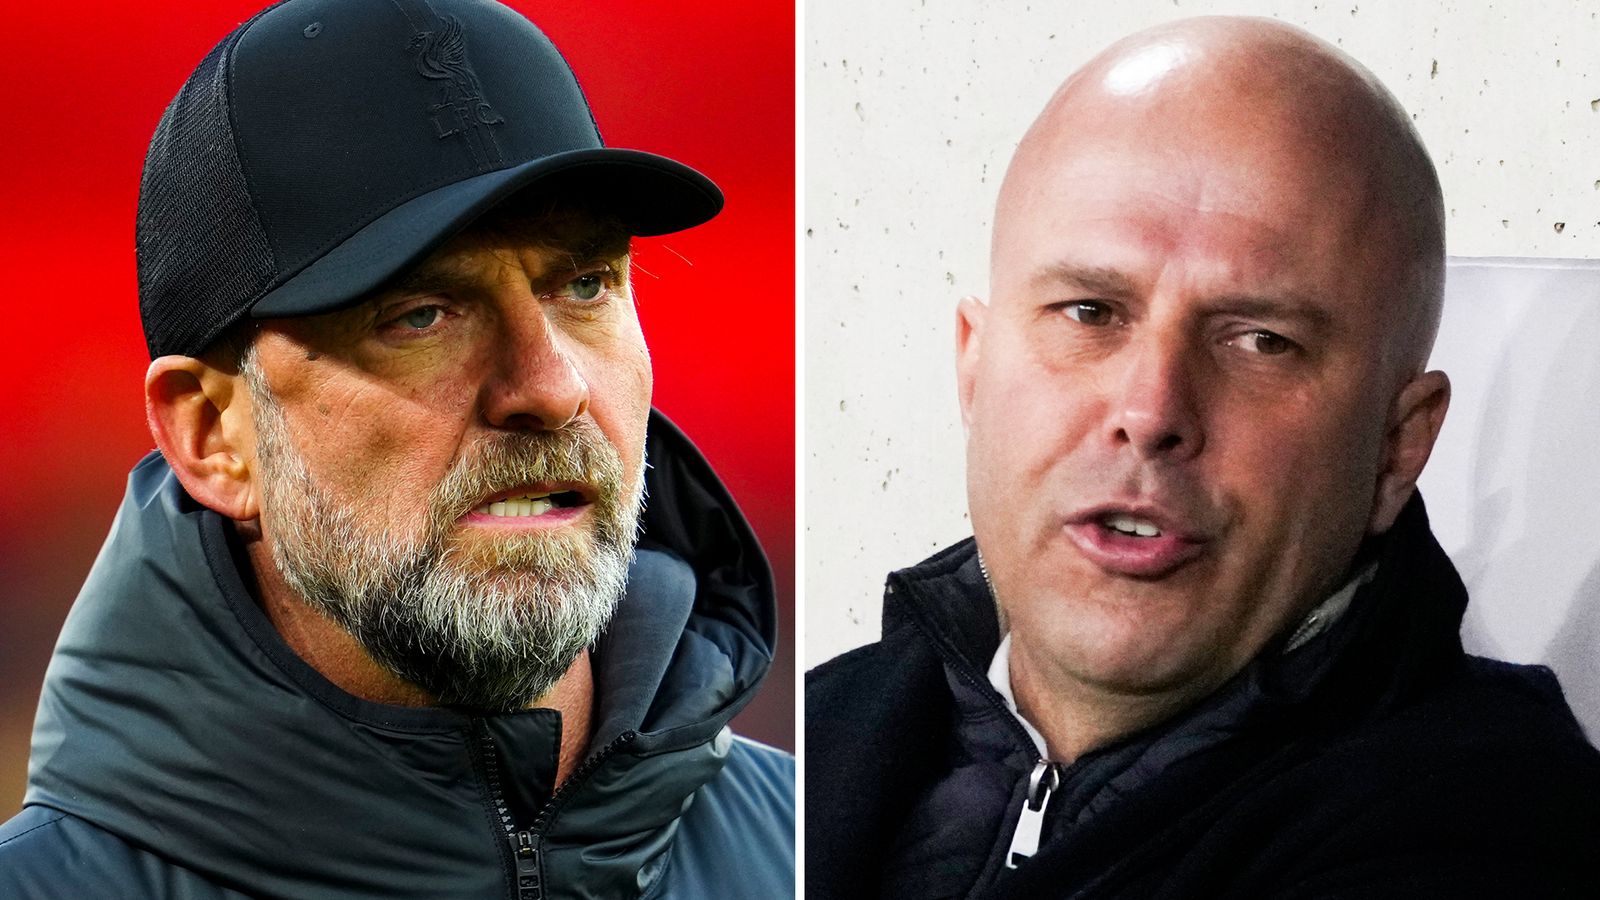 Liverpool: Jurgen Klopp says Arne Slot's potential appointment 'really good' for club